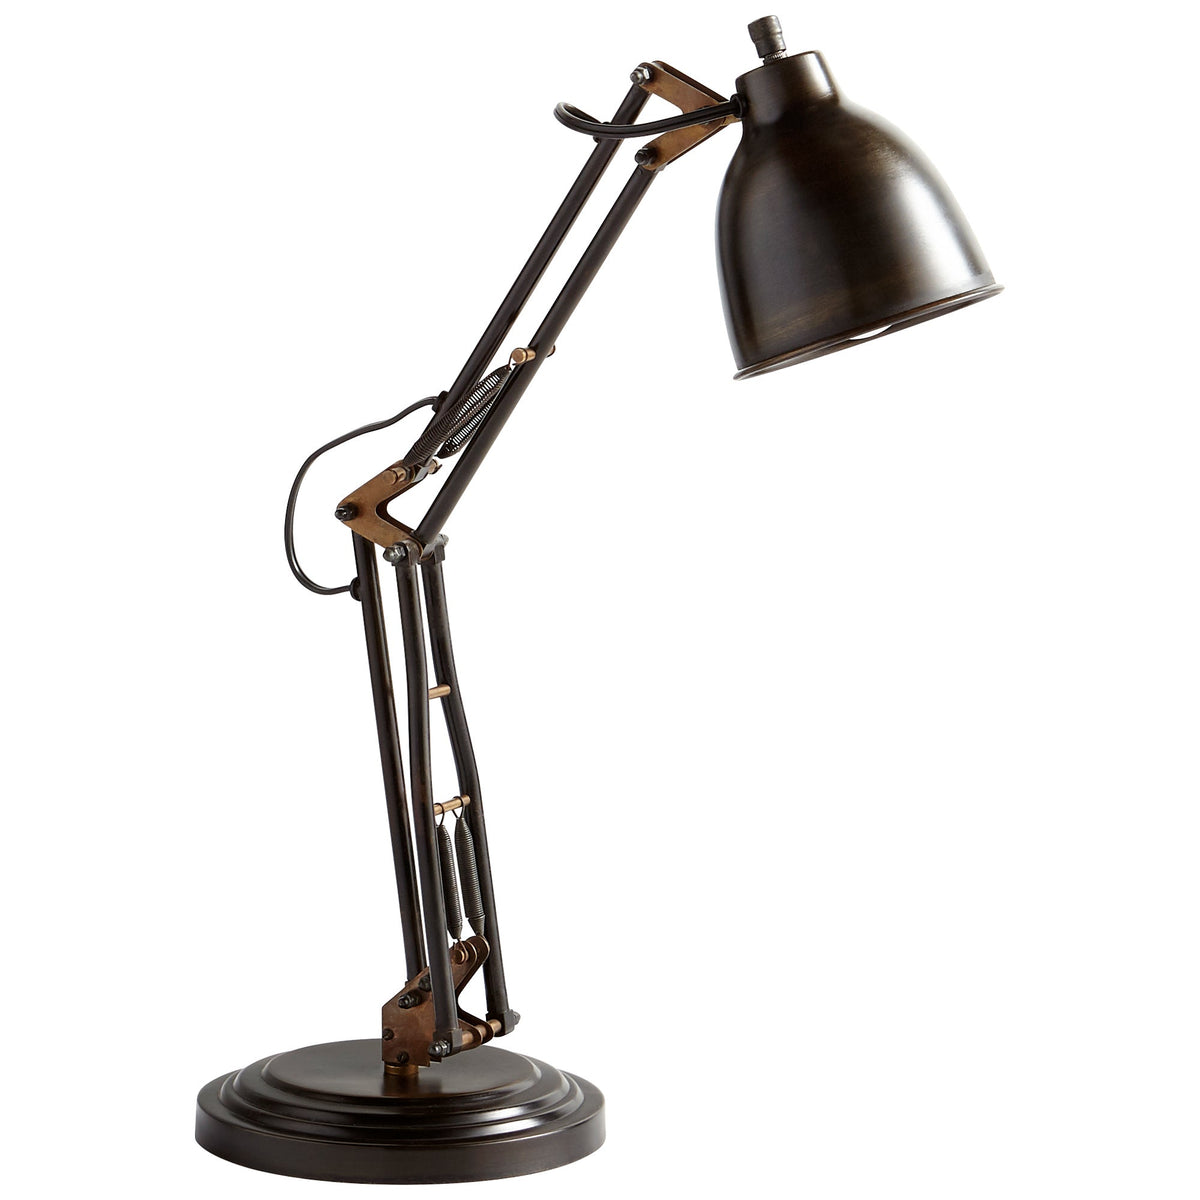 Right Radius Table Lamp by Cyan